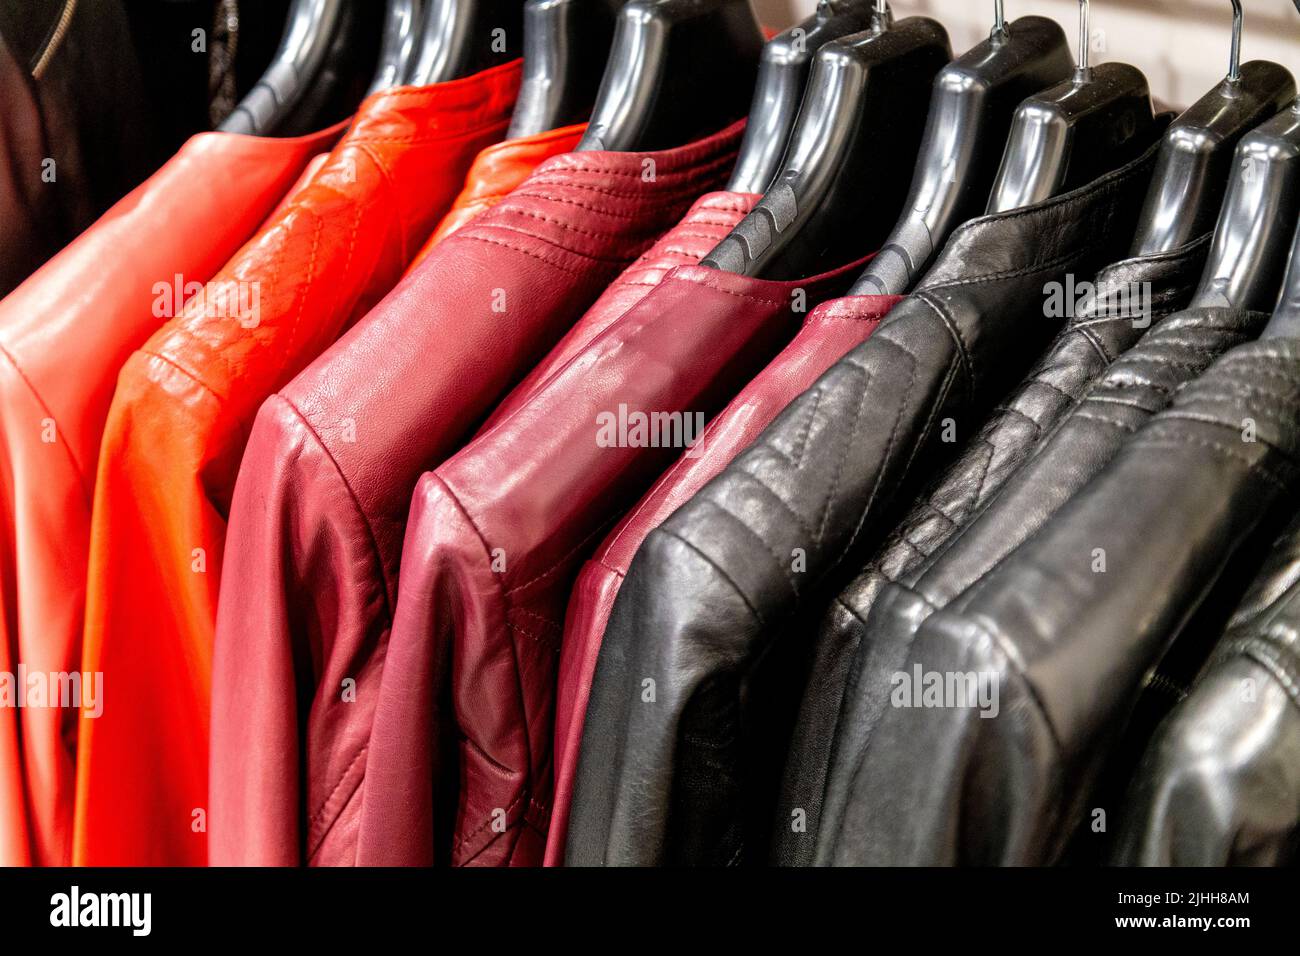 Colourful leather jackets in red and black hanging on a rail Stock Photo